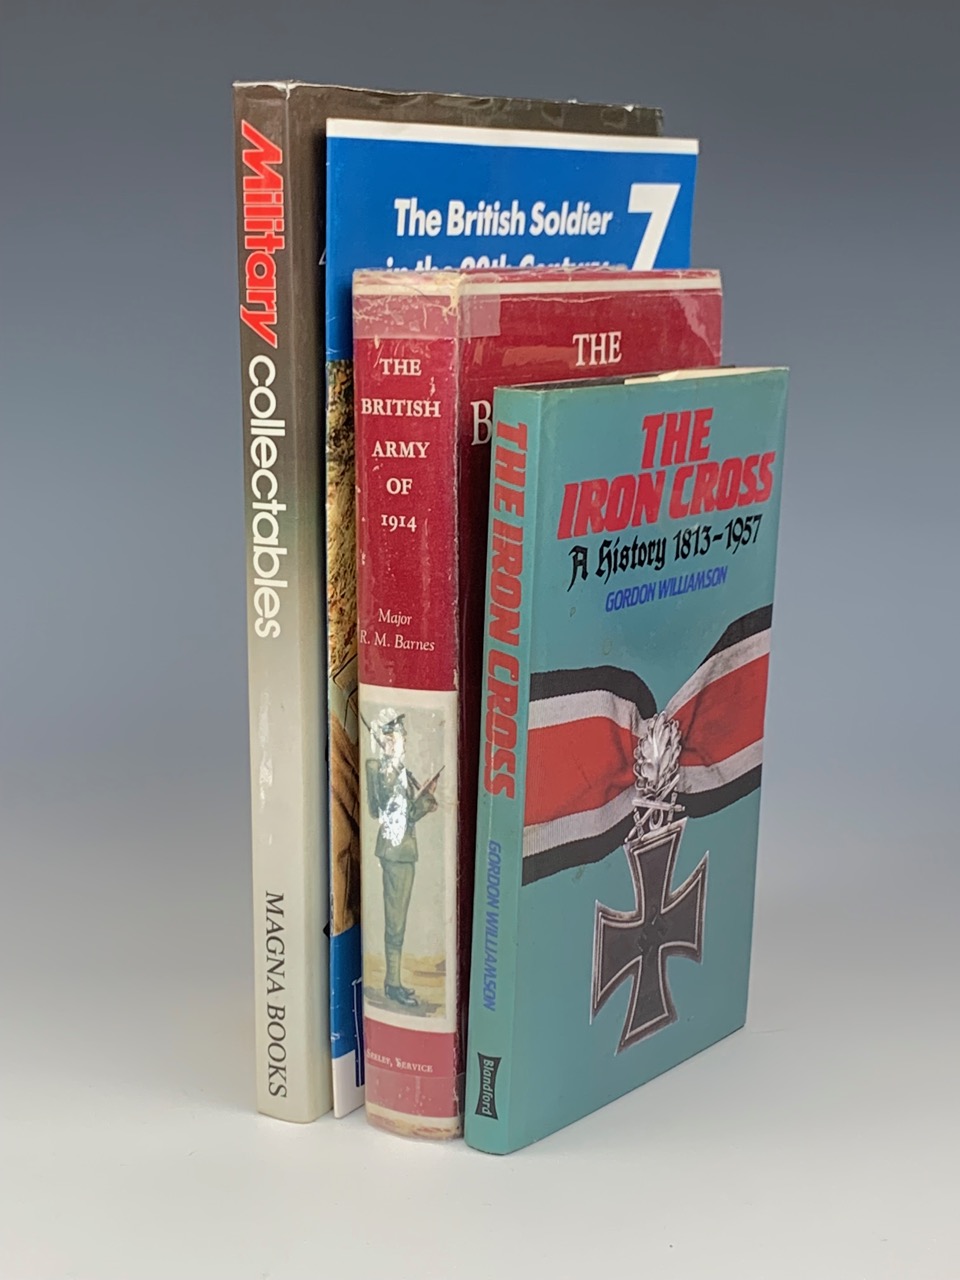 A group of militaria and medal collectors' reference books including Williamson's "The Iron Cross, a